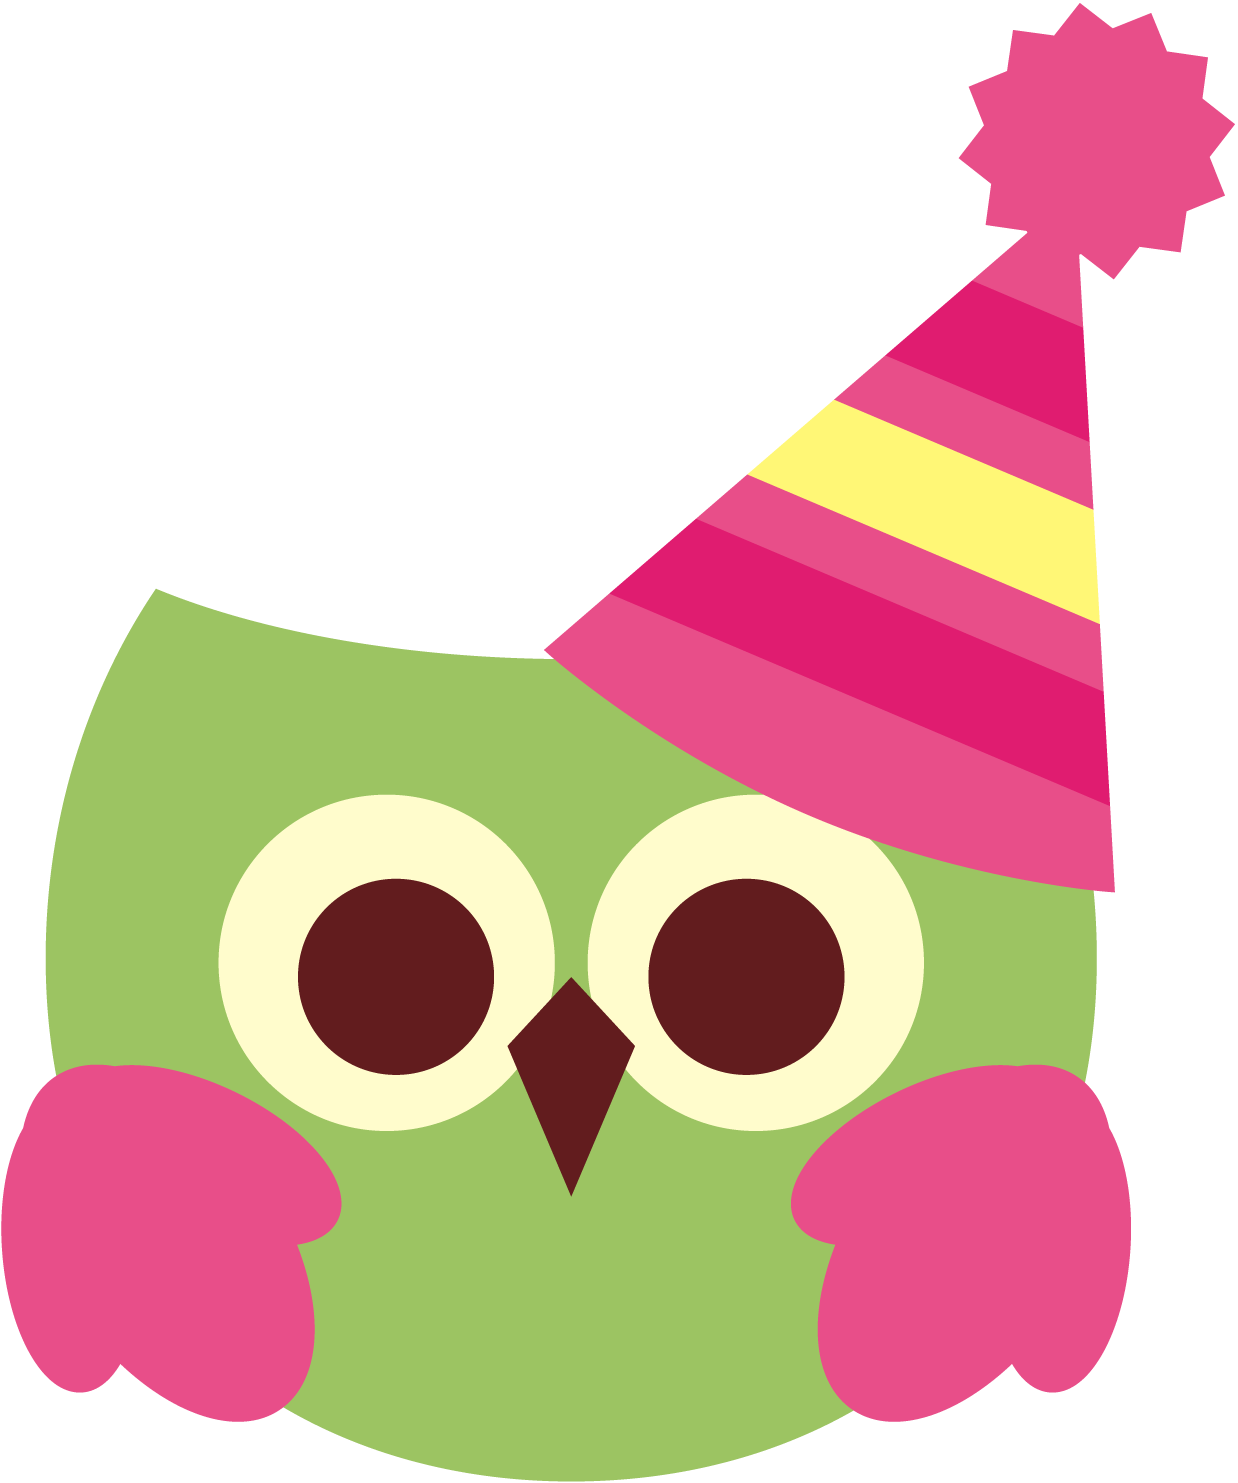 So I Ll Share This Cute Birthday Owl Clipart Graphic For Free Enjoy